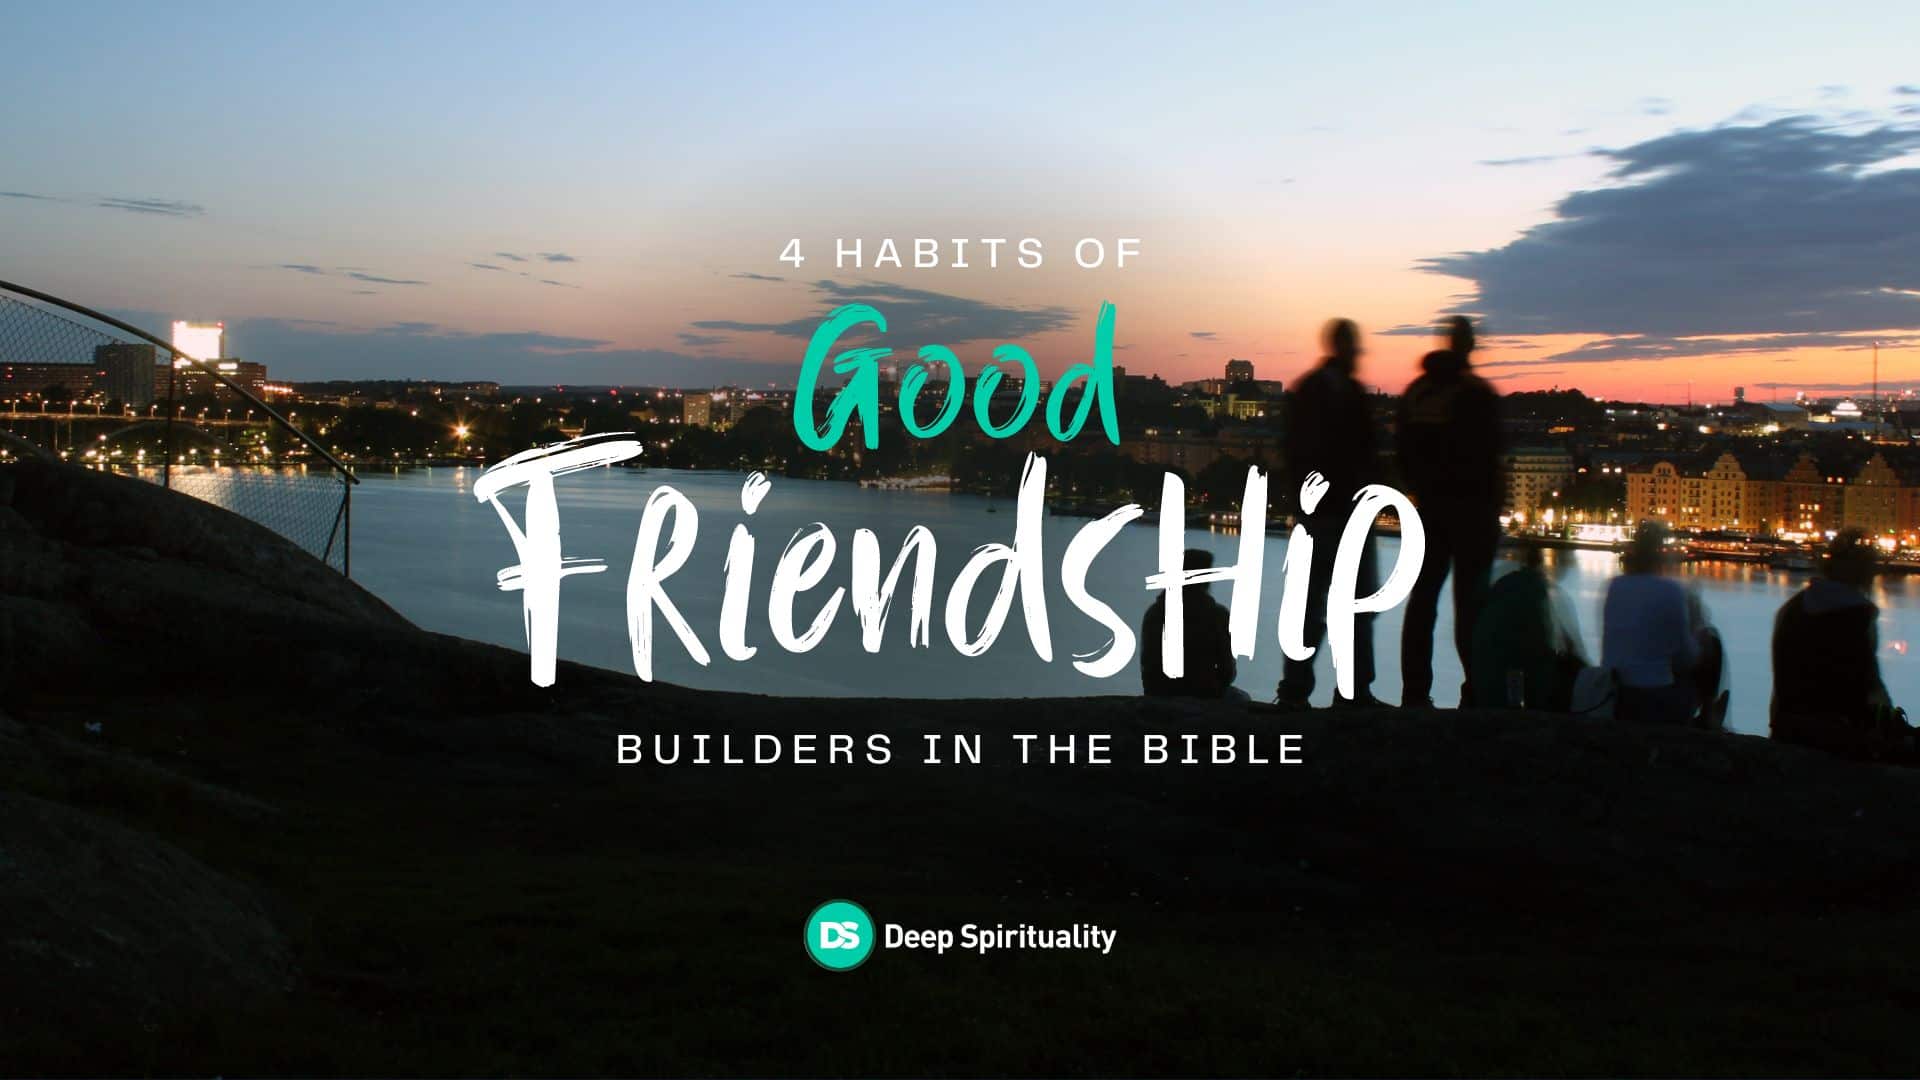 4 Habits to Build if You Want Good Friendships, According to the Bible 8